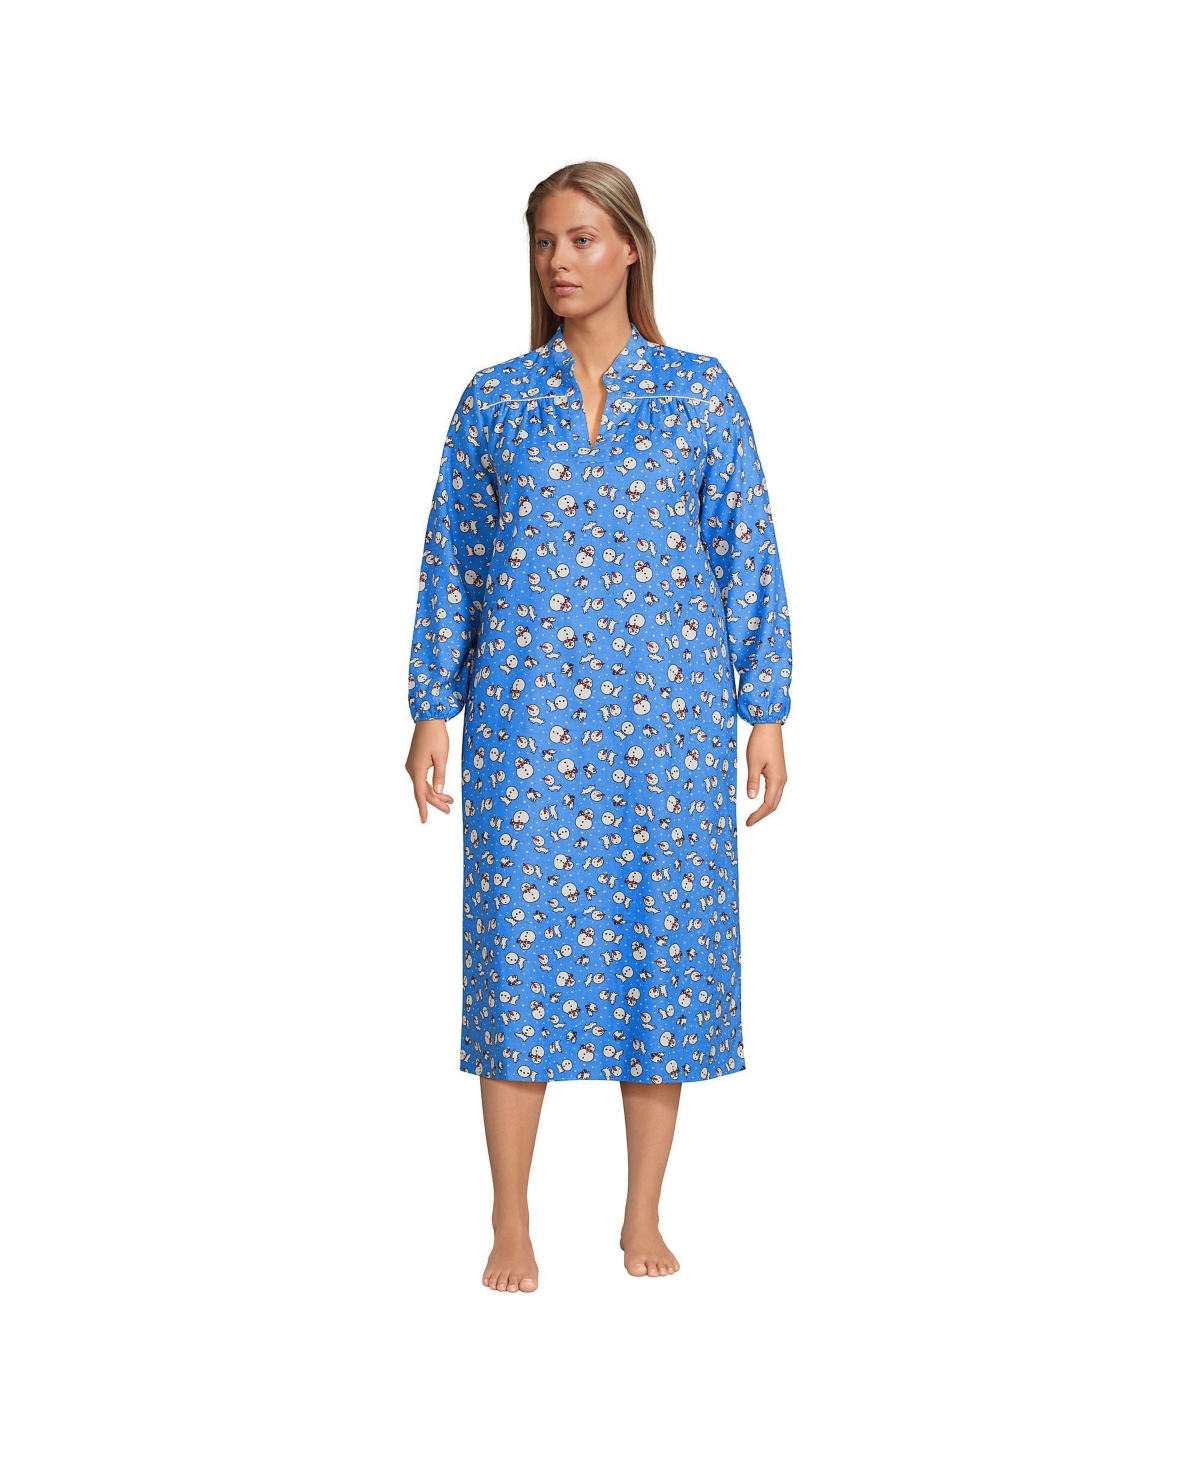 Women's Plus Size Long Sleeve Flannel Nightgown - Chicory blue snowman